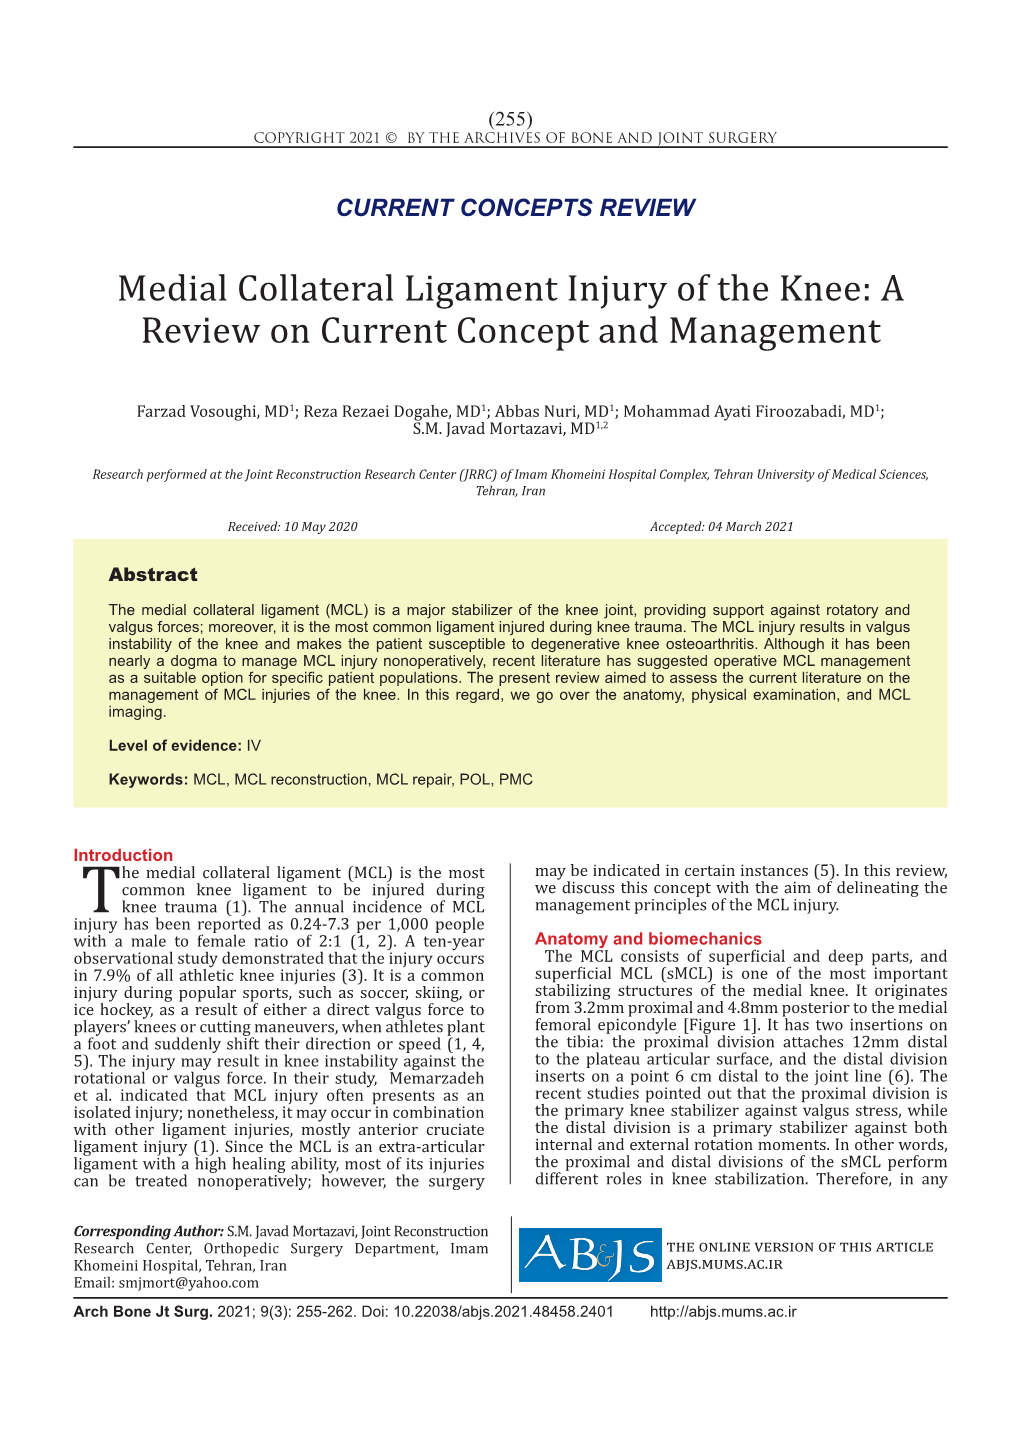 Medial Collateral Ligament Injury of the Knee: a Review on Current Concept and Management